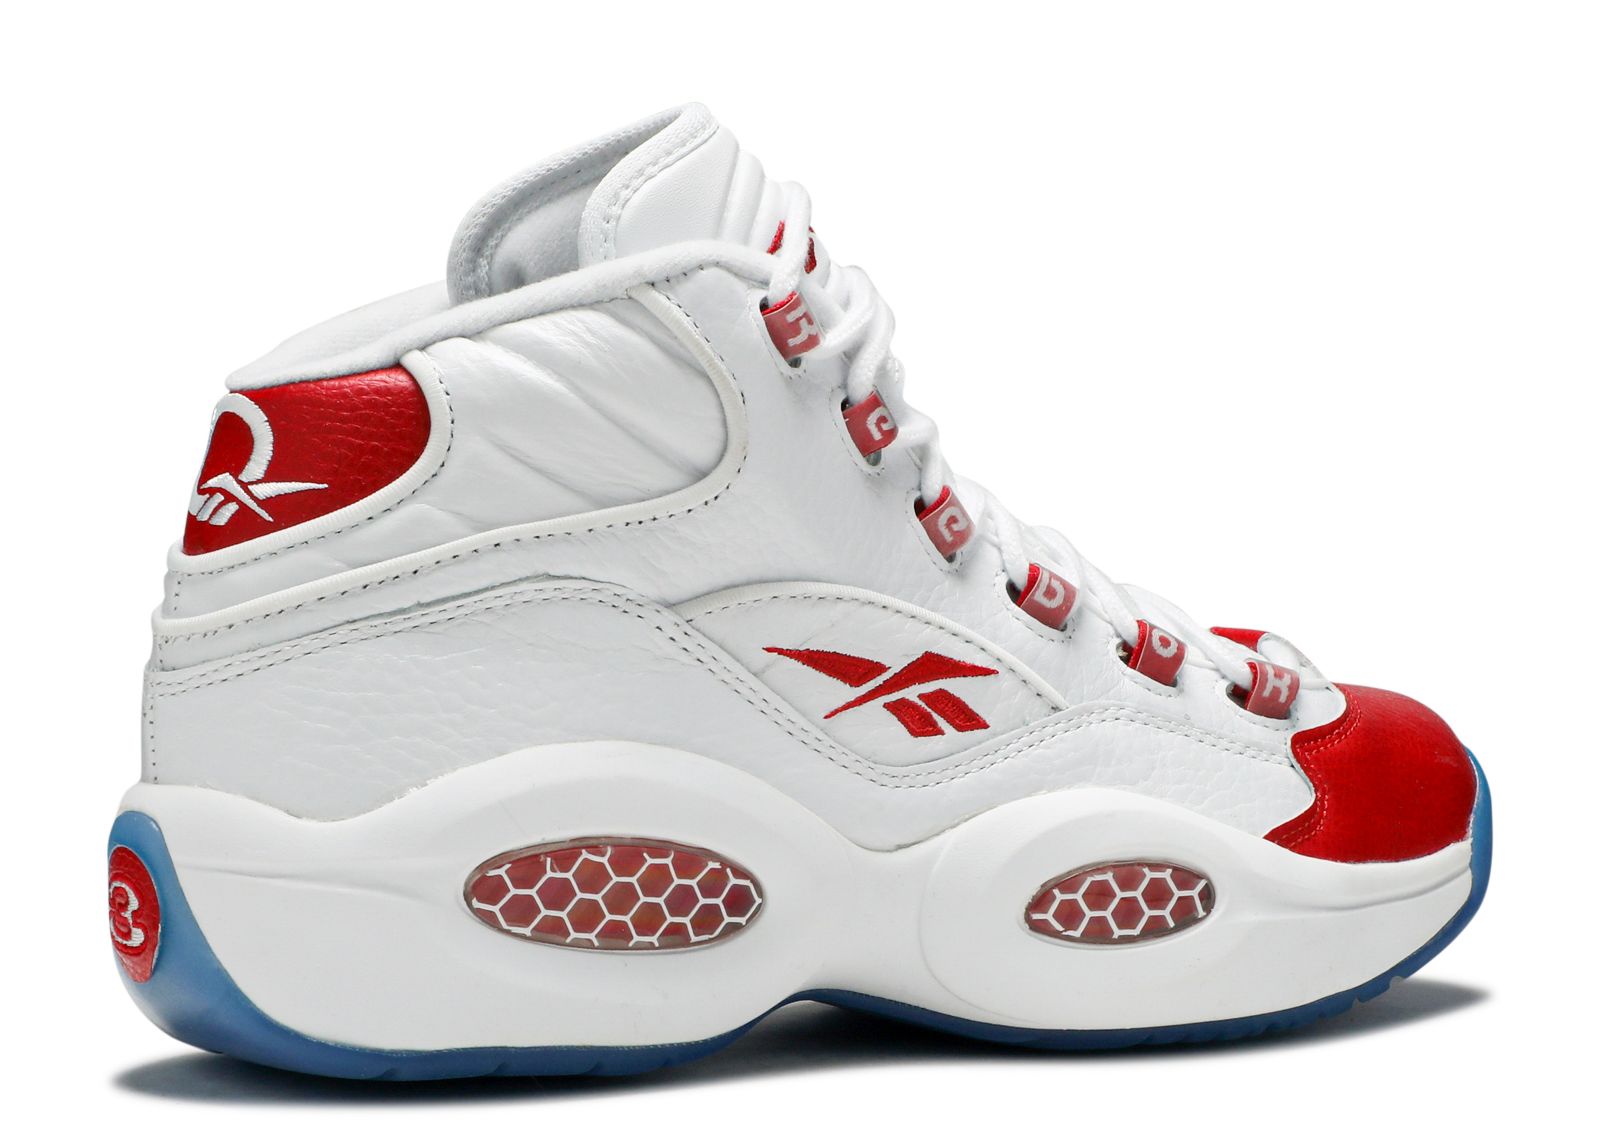 Reebok Iverson Question Pearlized Red size 5y